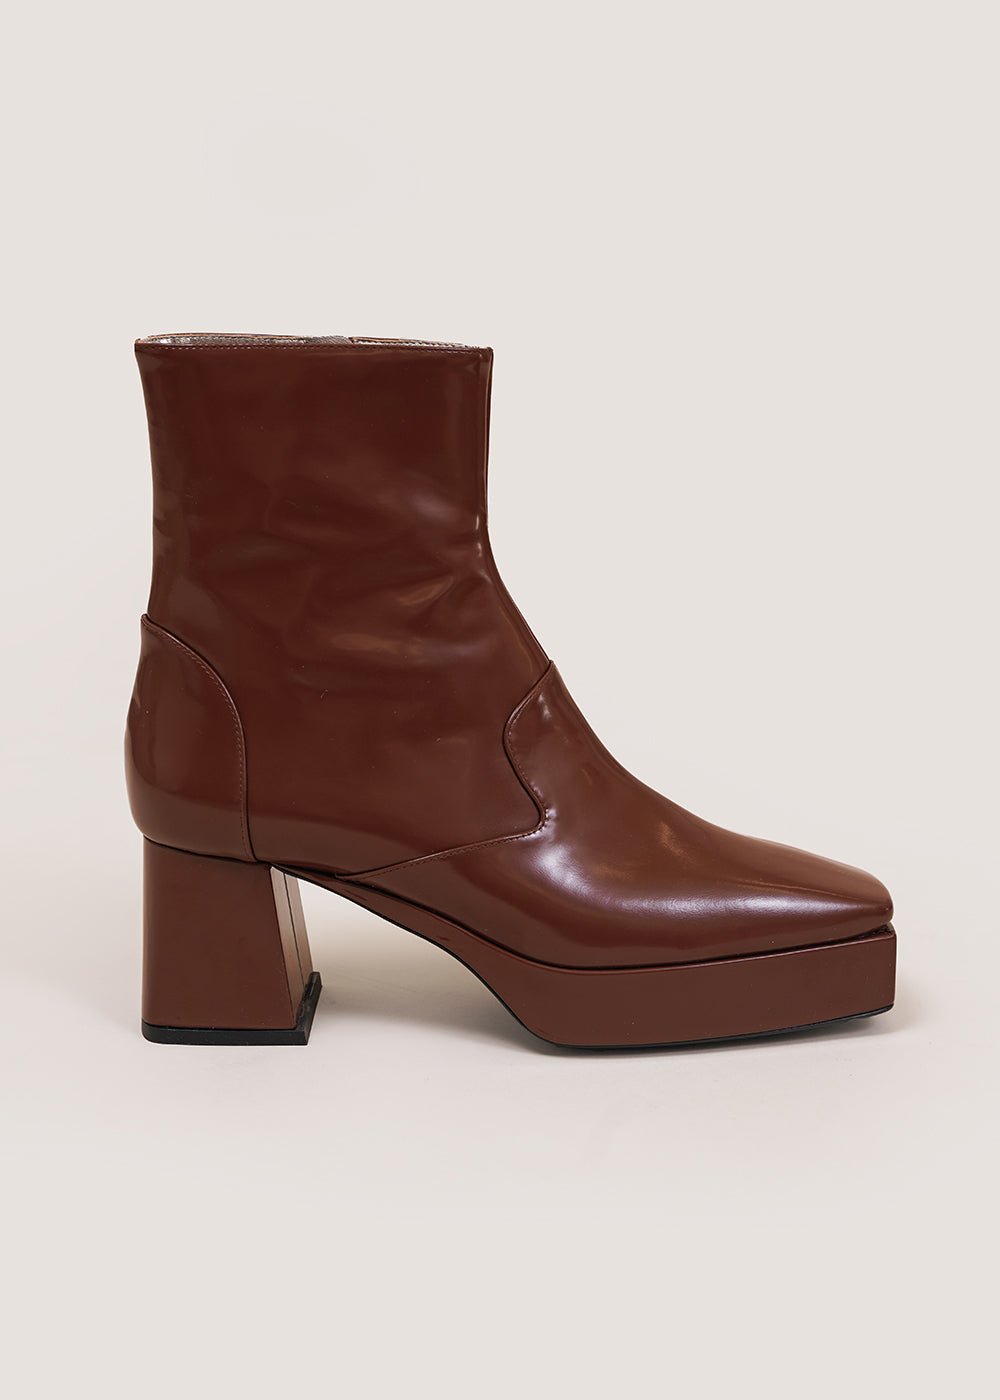 Suzanne Rae Orczy Platform Boots - New Classics Studios Sustainable Ethical Fashion Canada